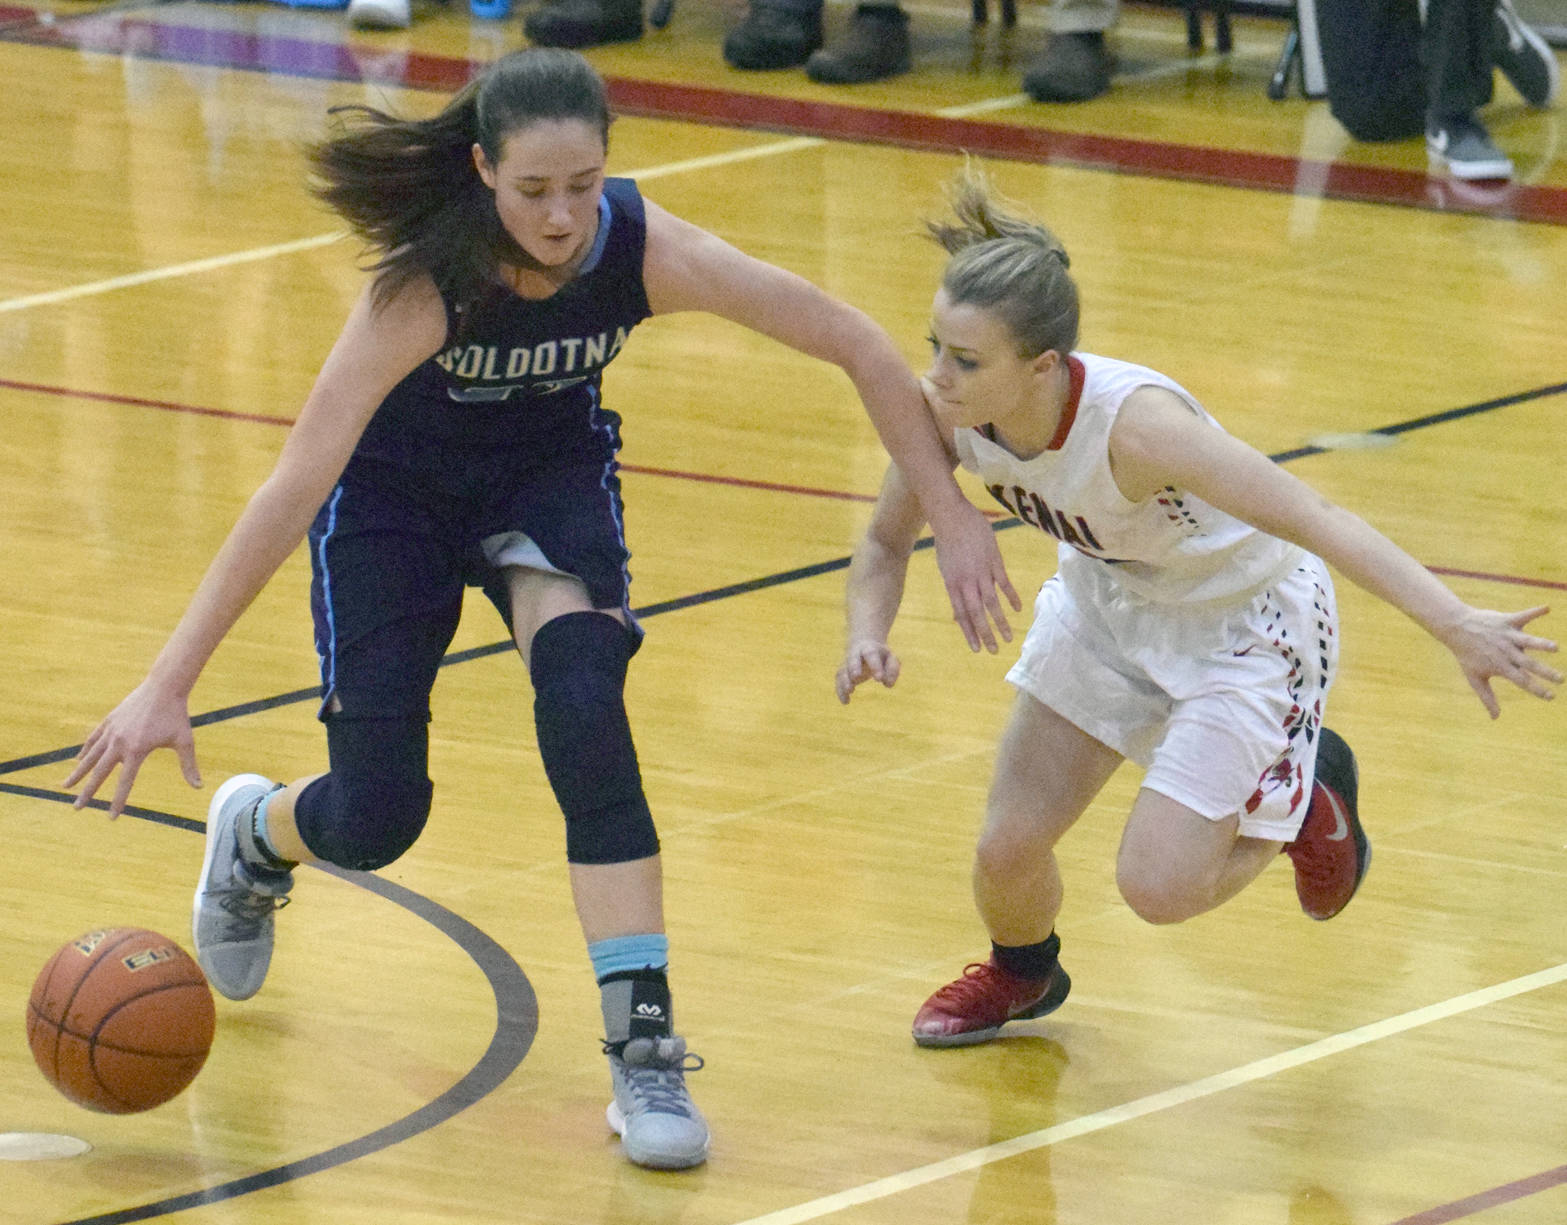 Soldotna’s Danica Schmidt protects the ball from Kenai Central’s Hayley Maw on Tuesday, Jan. 16, 2018, at Cliff Massie Court at Kenai Central High School. (Photo by Jeff Helminiak/Peninsula Clarion)